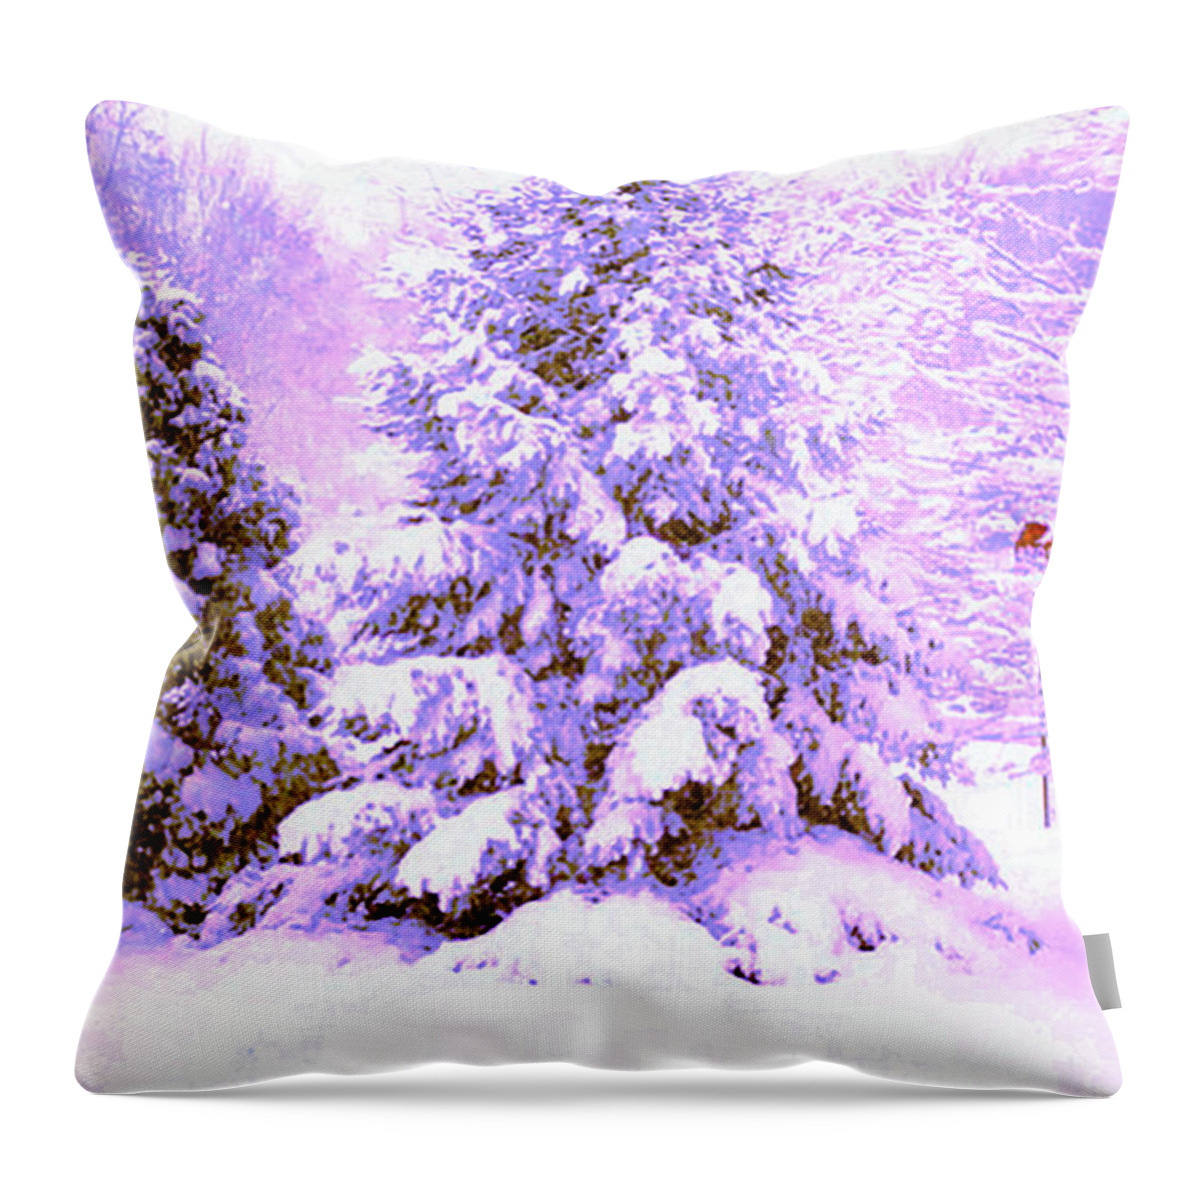 Winter Throw Pillow featuring the photograph Snow by CHAZ Daugherty